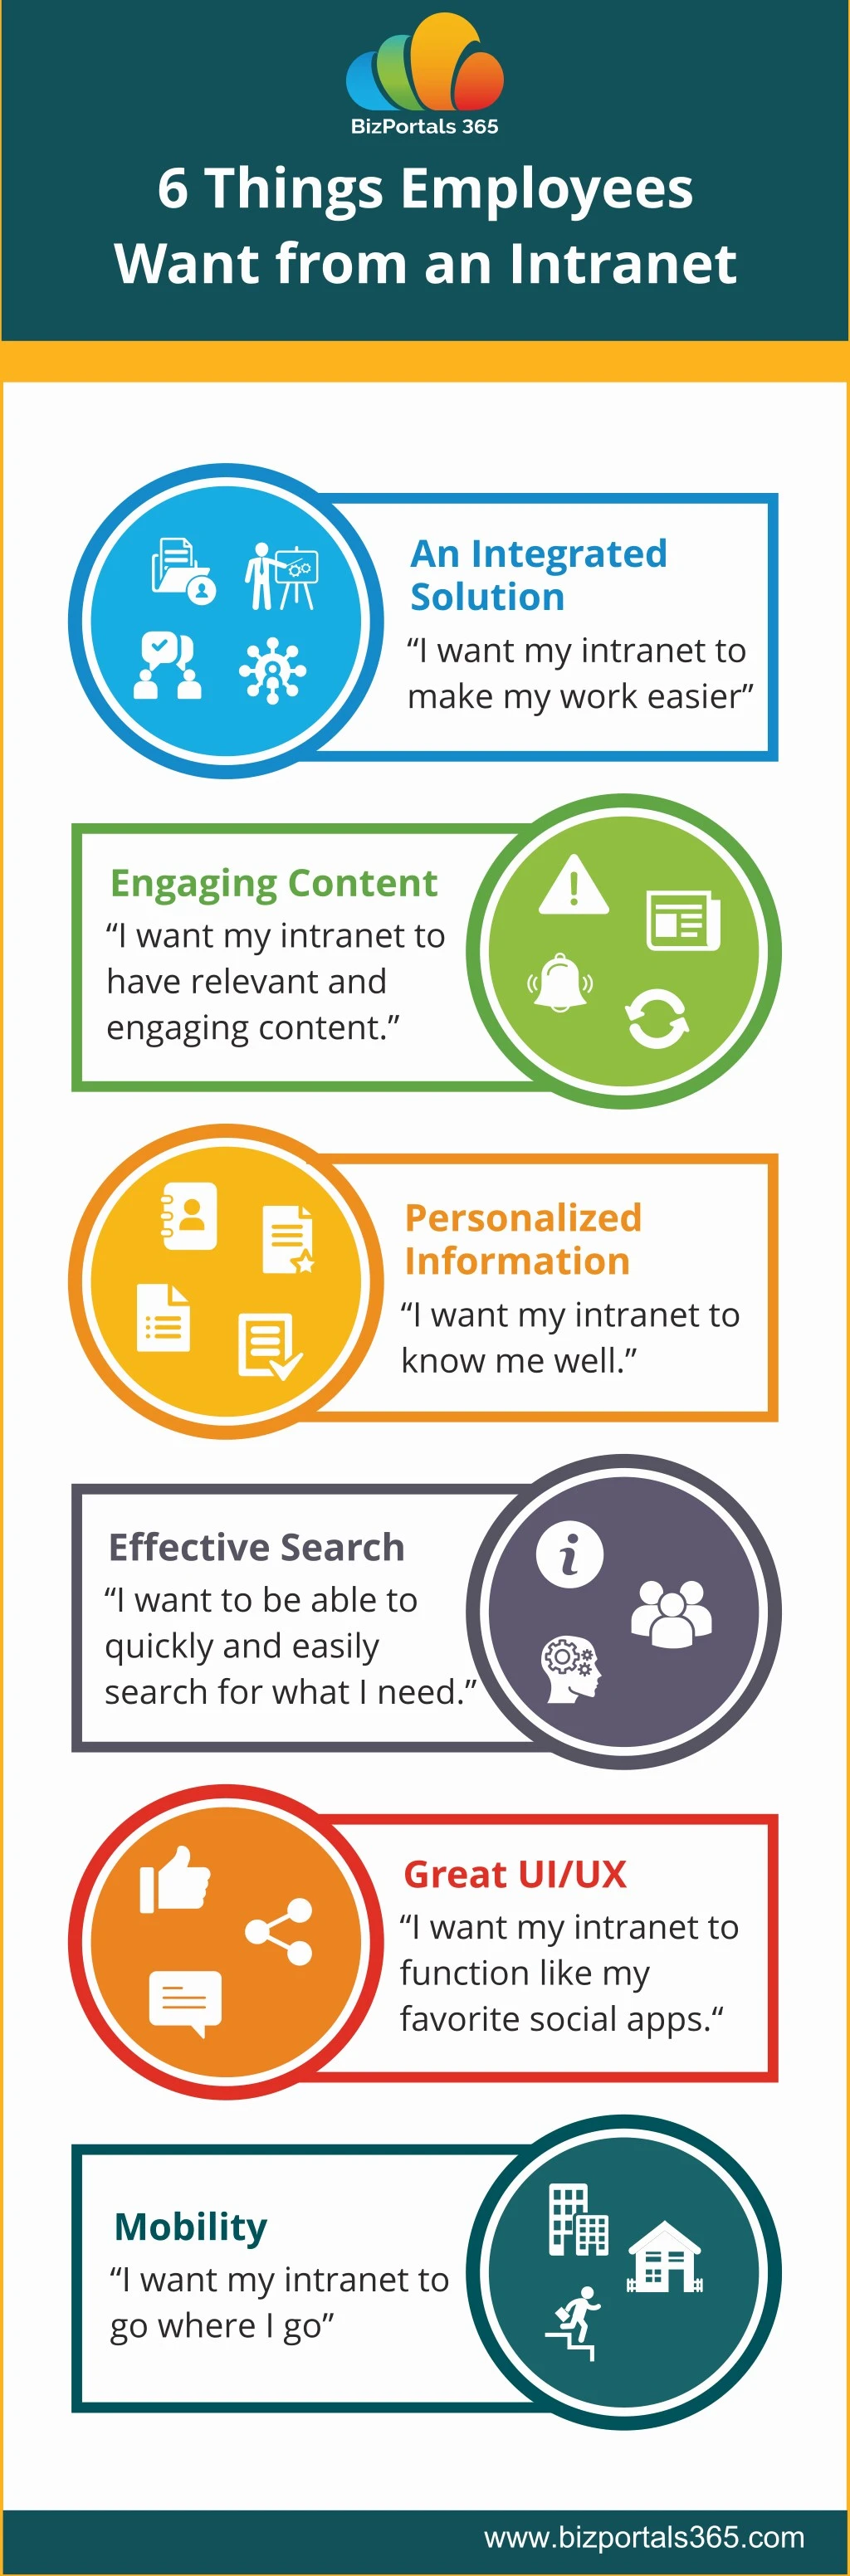 6 things employees want from an intranet